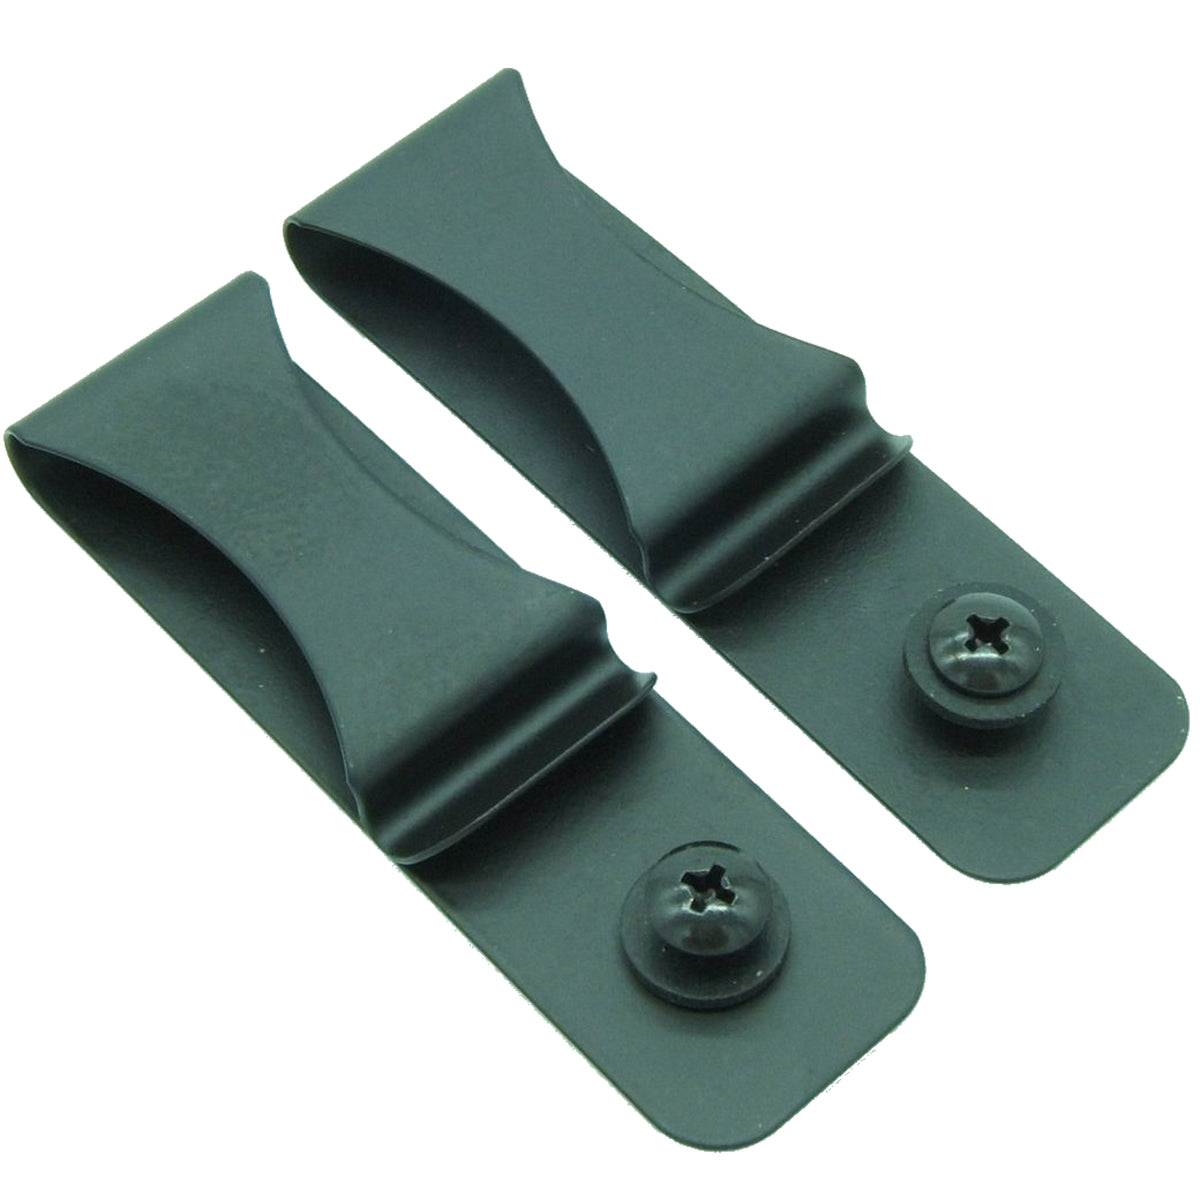 10PCS/LOT Quick Clips For Belt Kydex Leather Hybrid Holster Loop Clamp with  Screw Fits IWB OWB Applications Tool Part